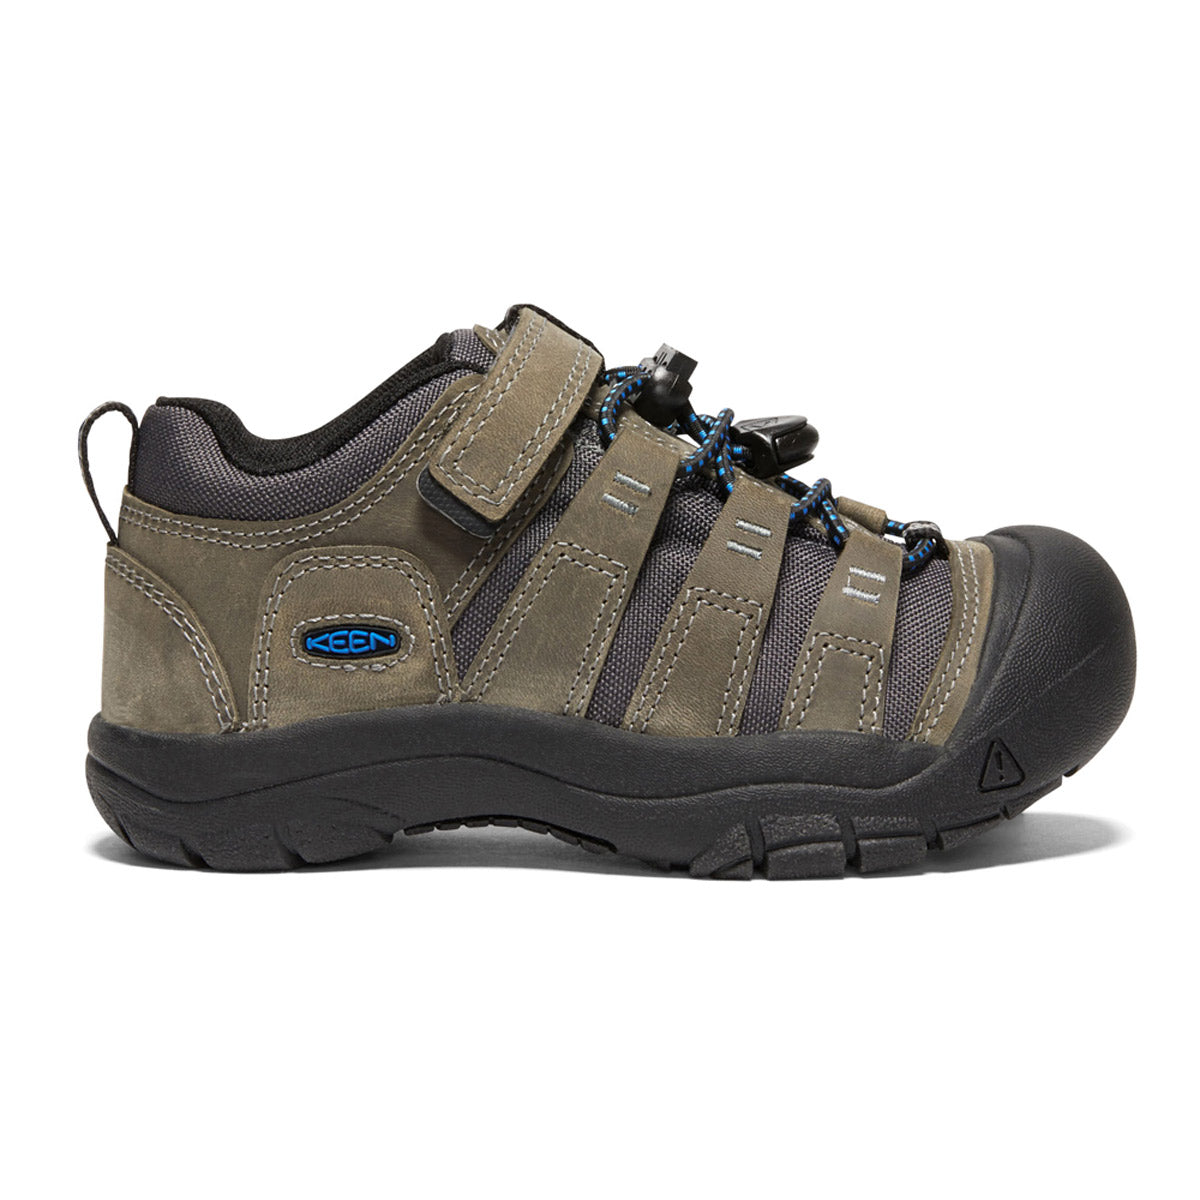 A single steel grey and brilliant blue Keen Newport hiking shoe with hook-and-loop straps and a reinforced toe cap.